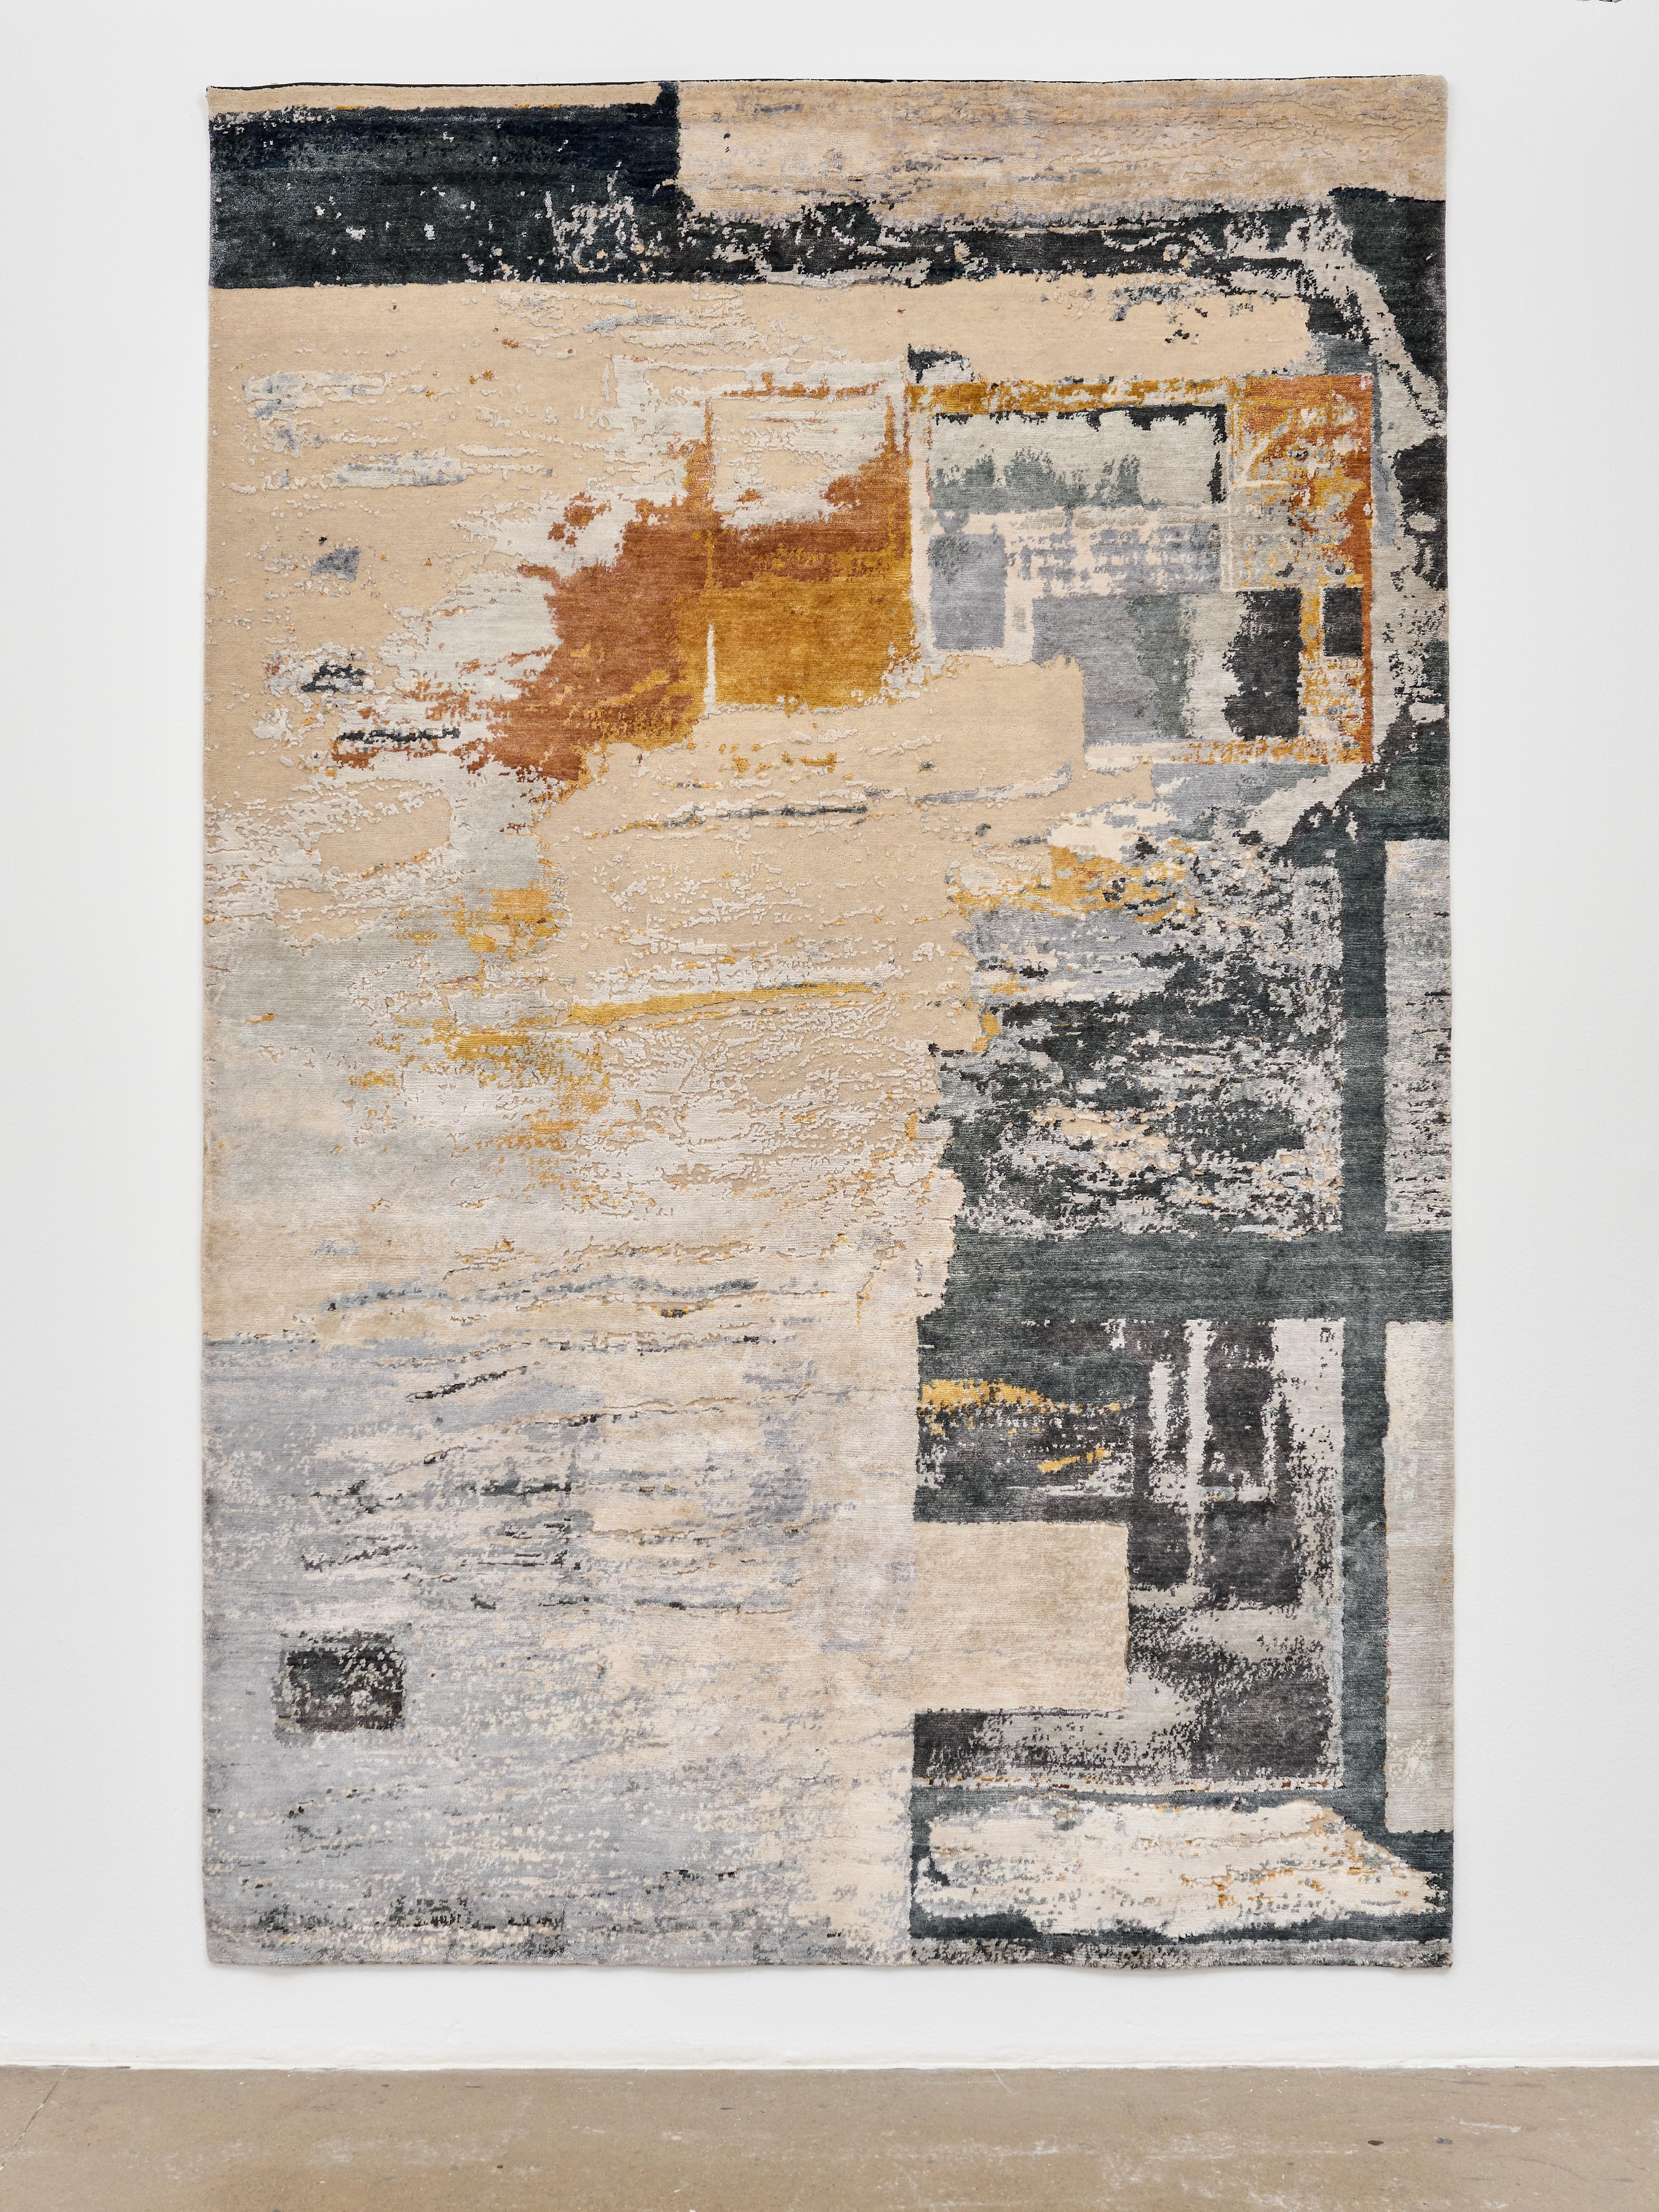 Sepideh Mehraban

Untitled II

2021

Silk and wool tapestry

Work: 301 x 203 cm

Edition of 3

Sales enquiries